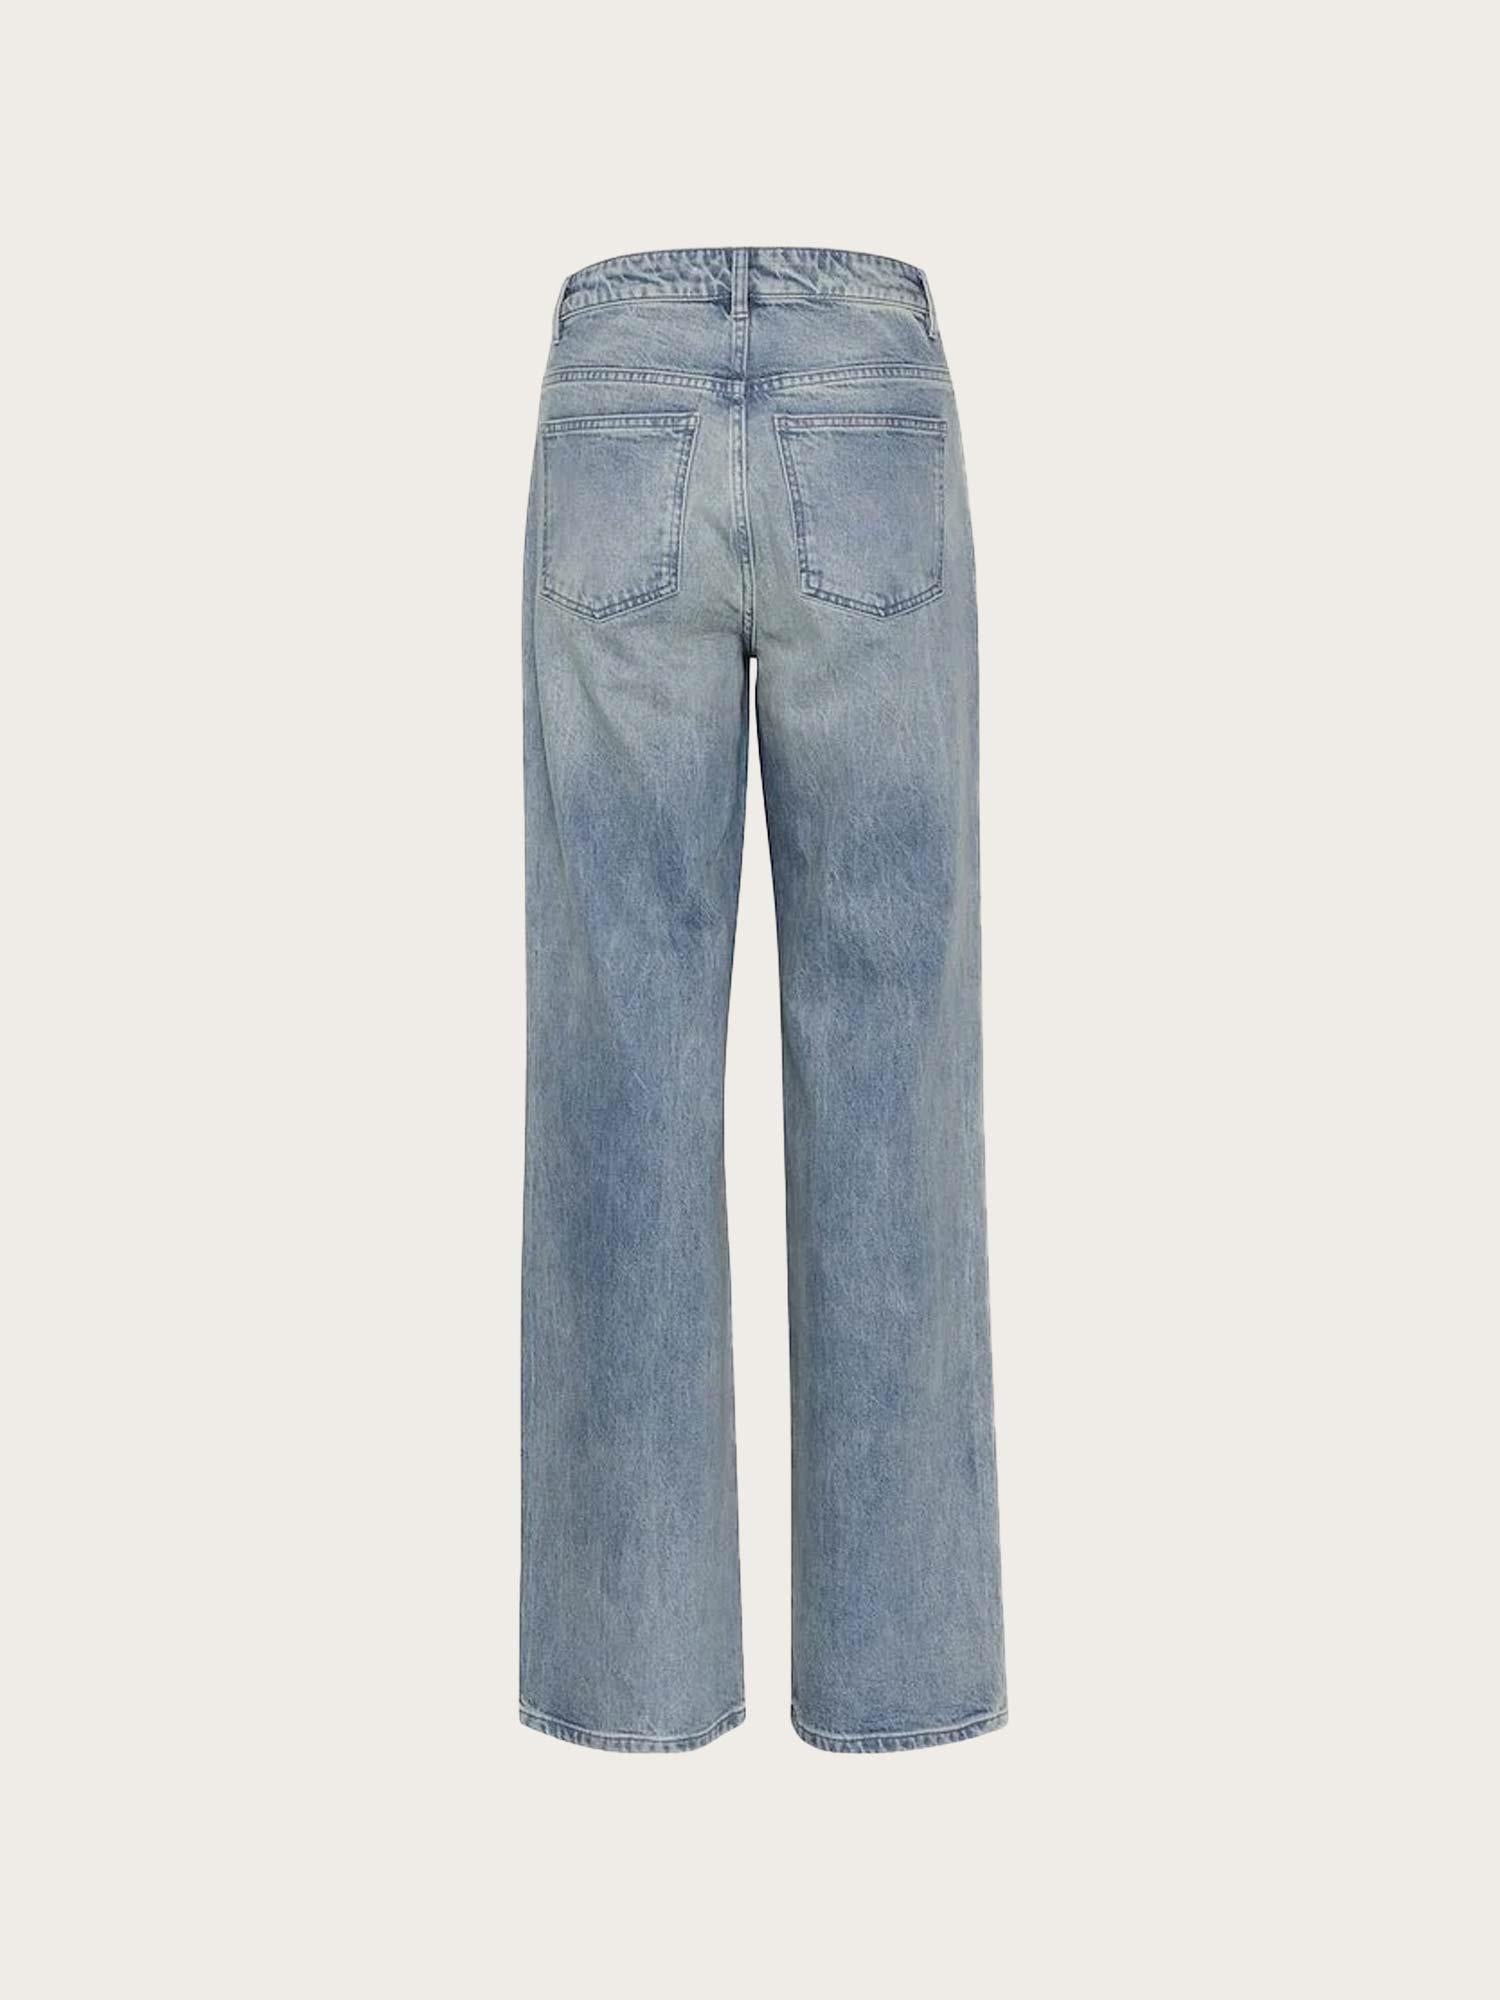 Zorah MW jeans - Mid Blue Washed